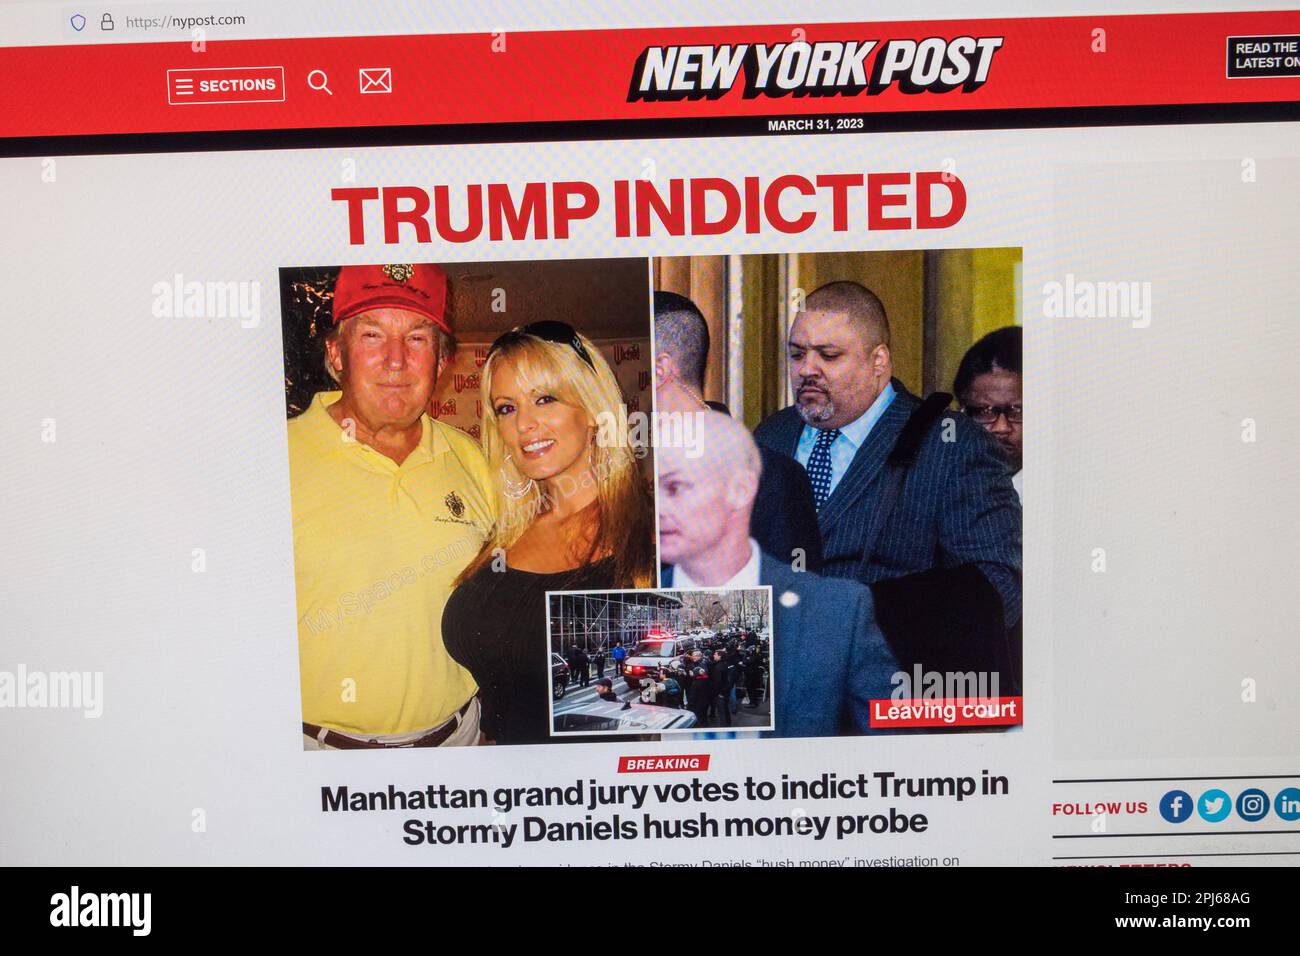 'Trump Indicted' headline on The New York Post website with breaking news of the indictment of Fm President Donald Trump, 31st March 2023. Stock Photo